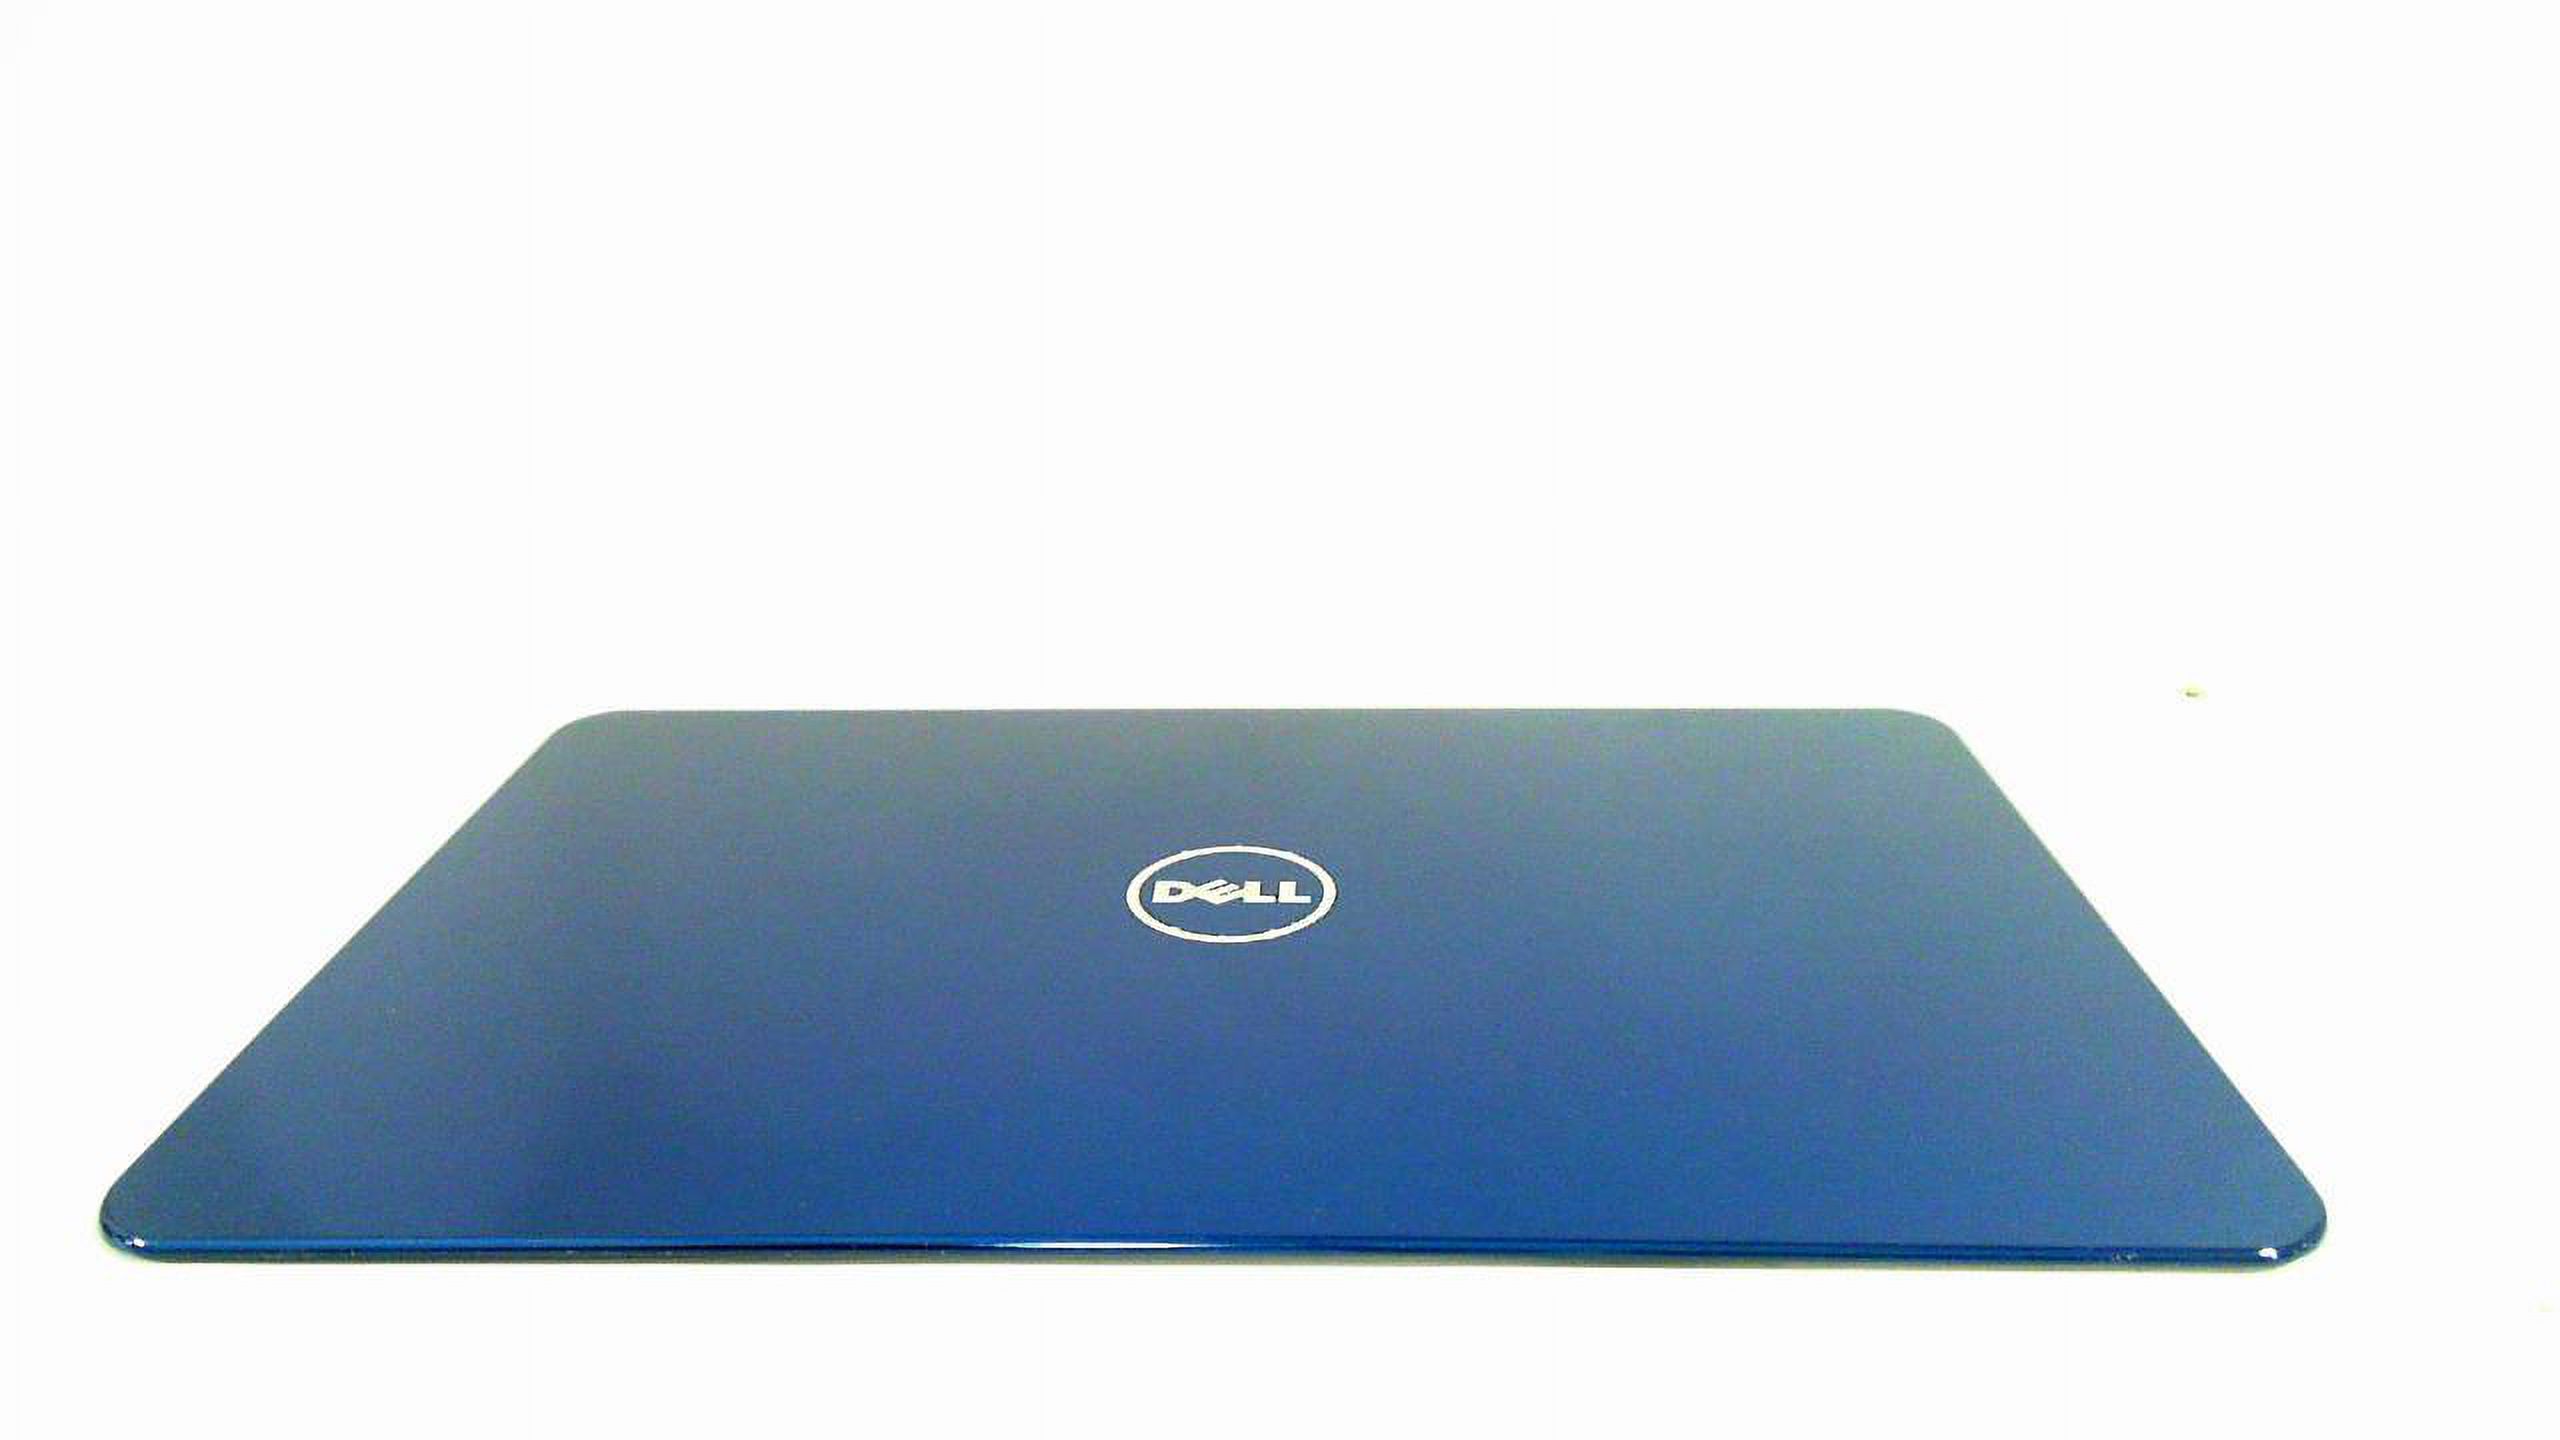 Dell SWITCH by Design Studio Peacock Blue - Notebook replacement lid - peacock blue - for Inspiron 15R, 15R N5110 - image 3 of 3